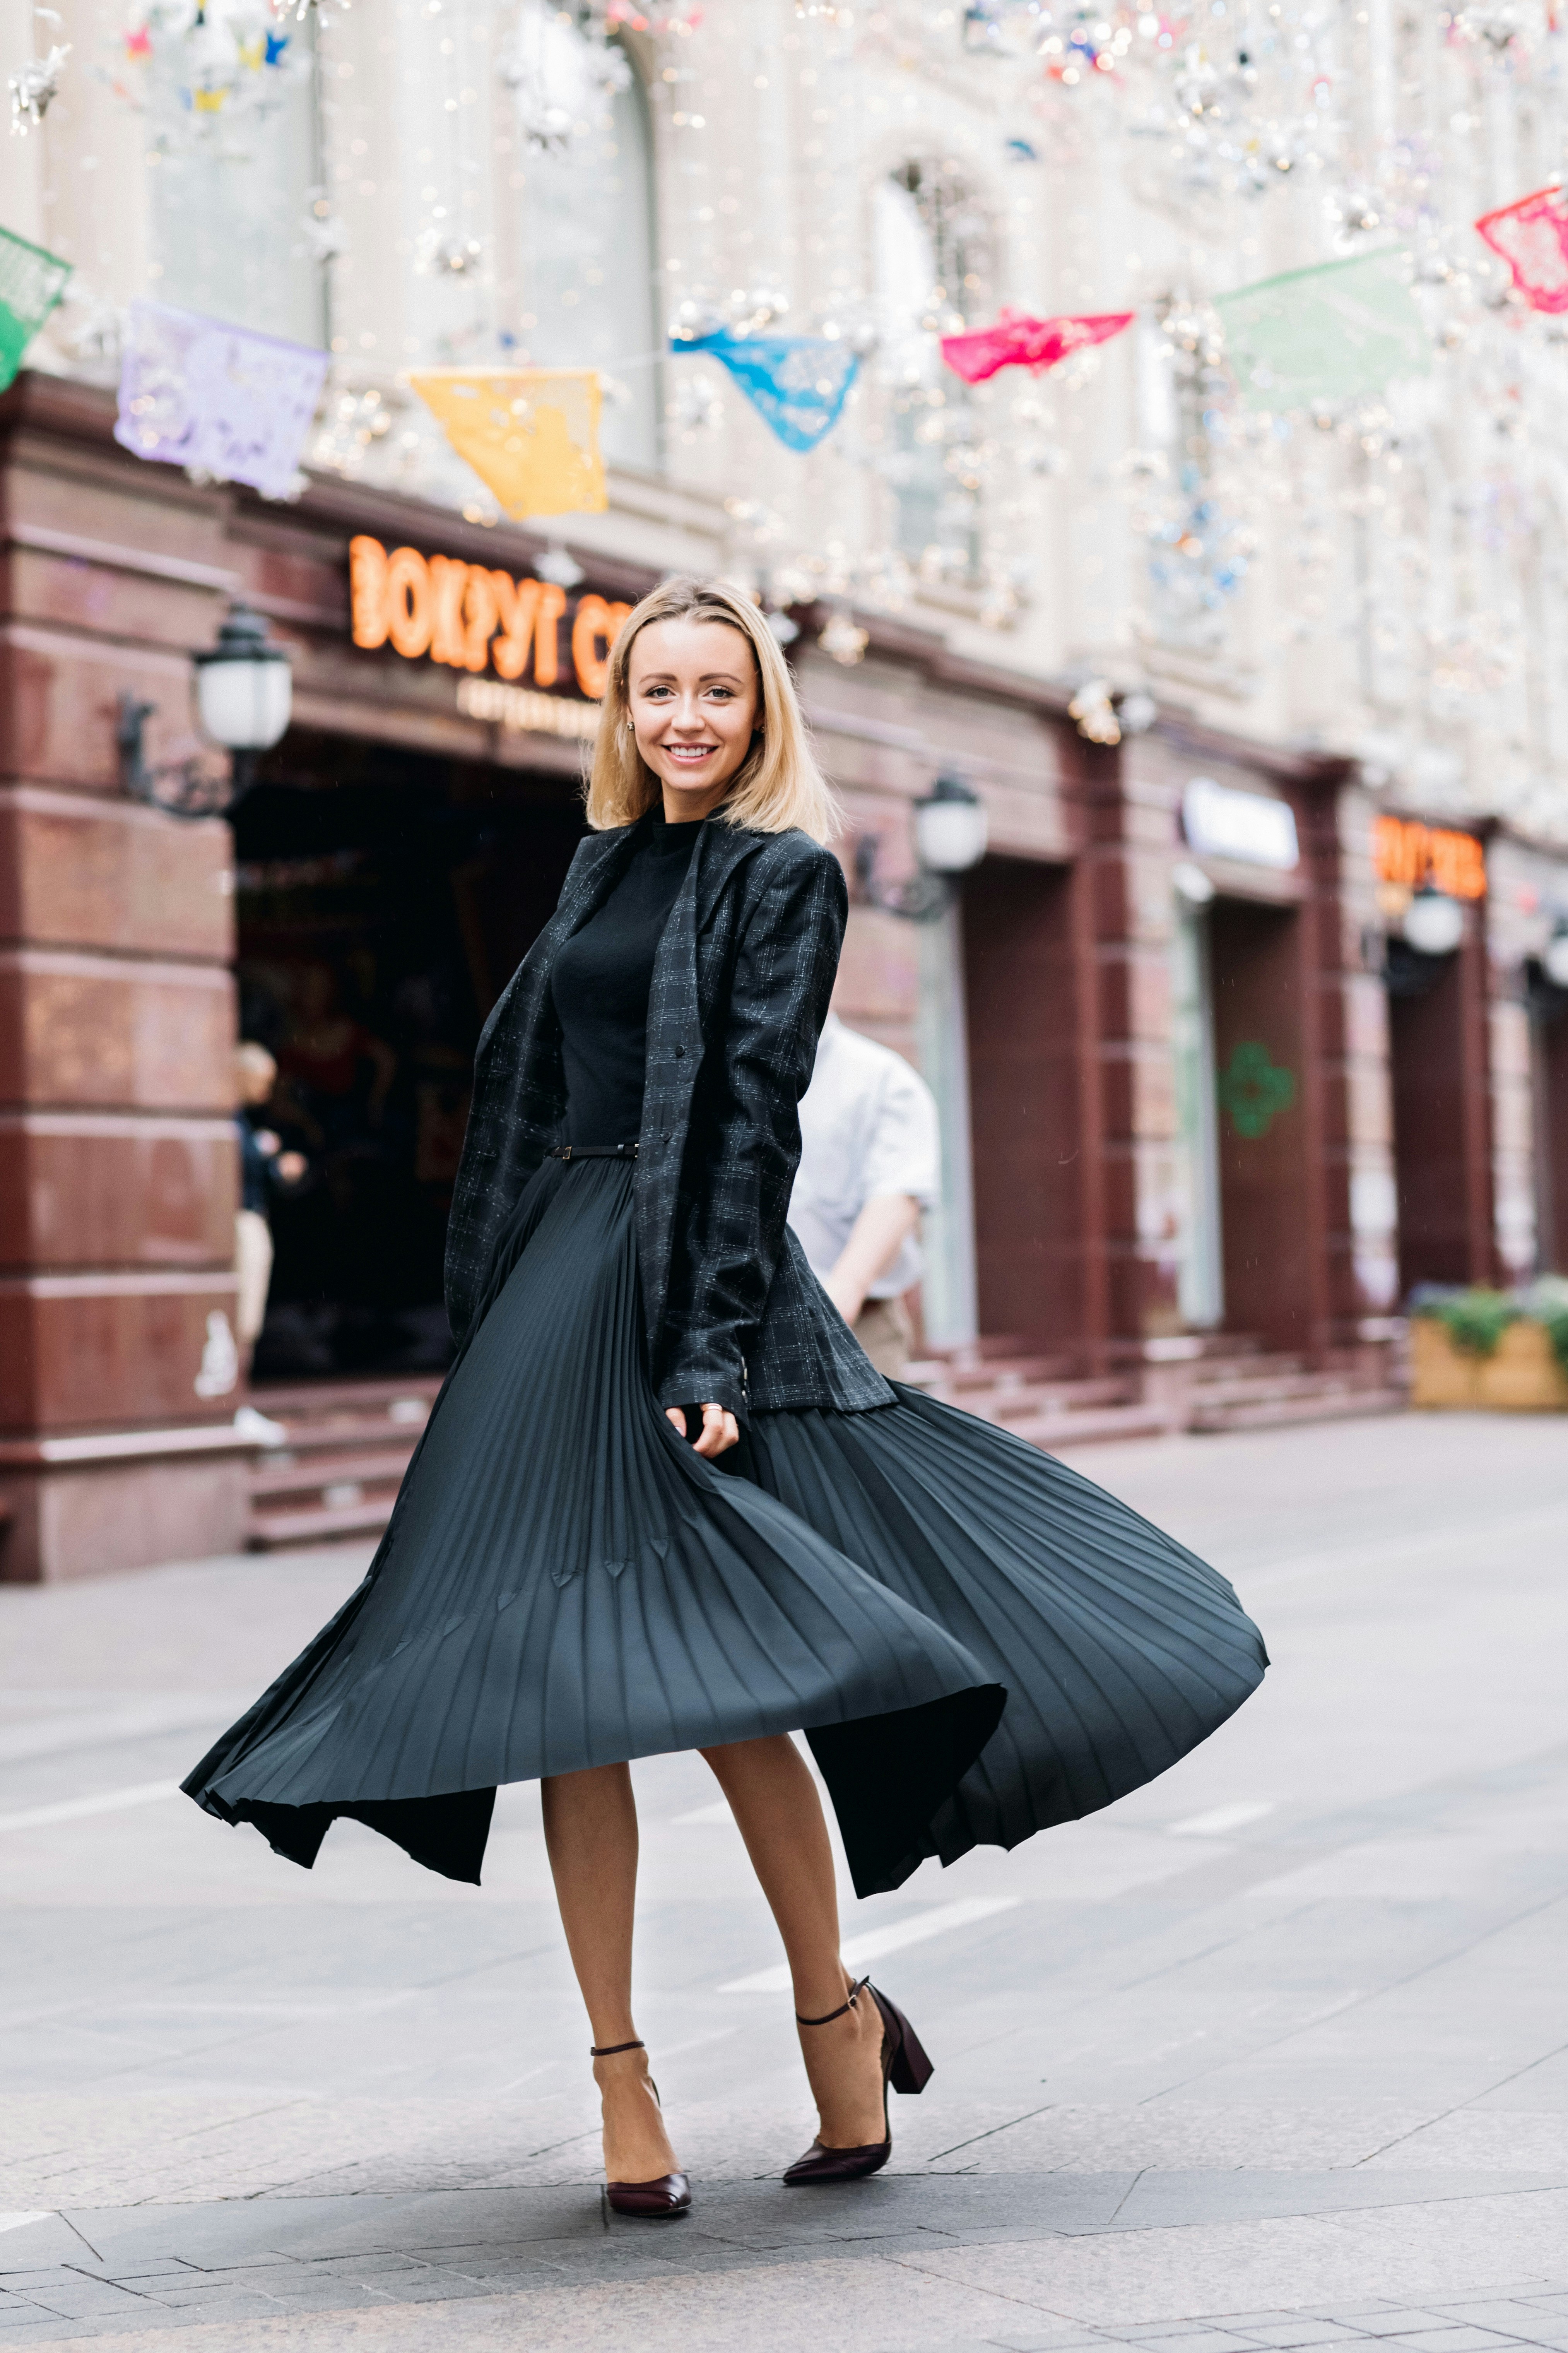 Follow me to, wherever amazes you.
From Moscow with GIADA♥️
|| Nataly Osmann in GIADA
|| F/W 2018-19 Main Collection
|| Flannel bouclé suit with Asymmetrical Georgette motif plissé skirt
|| #FOLLOWMETO Project Founder
|| Forbes 2017 Top Travel Blogger
#GIADA-in-the-Spotlight